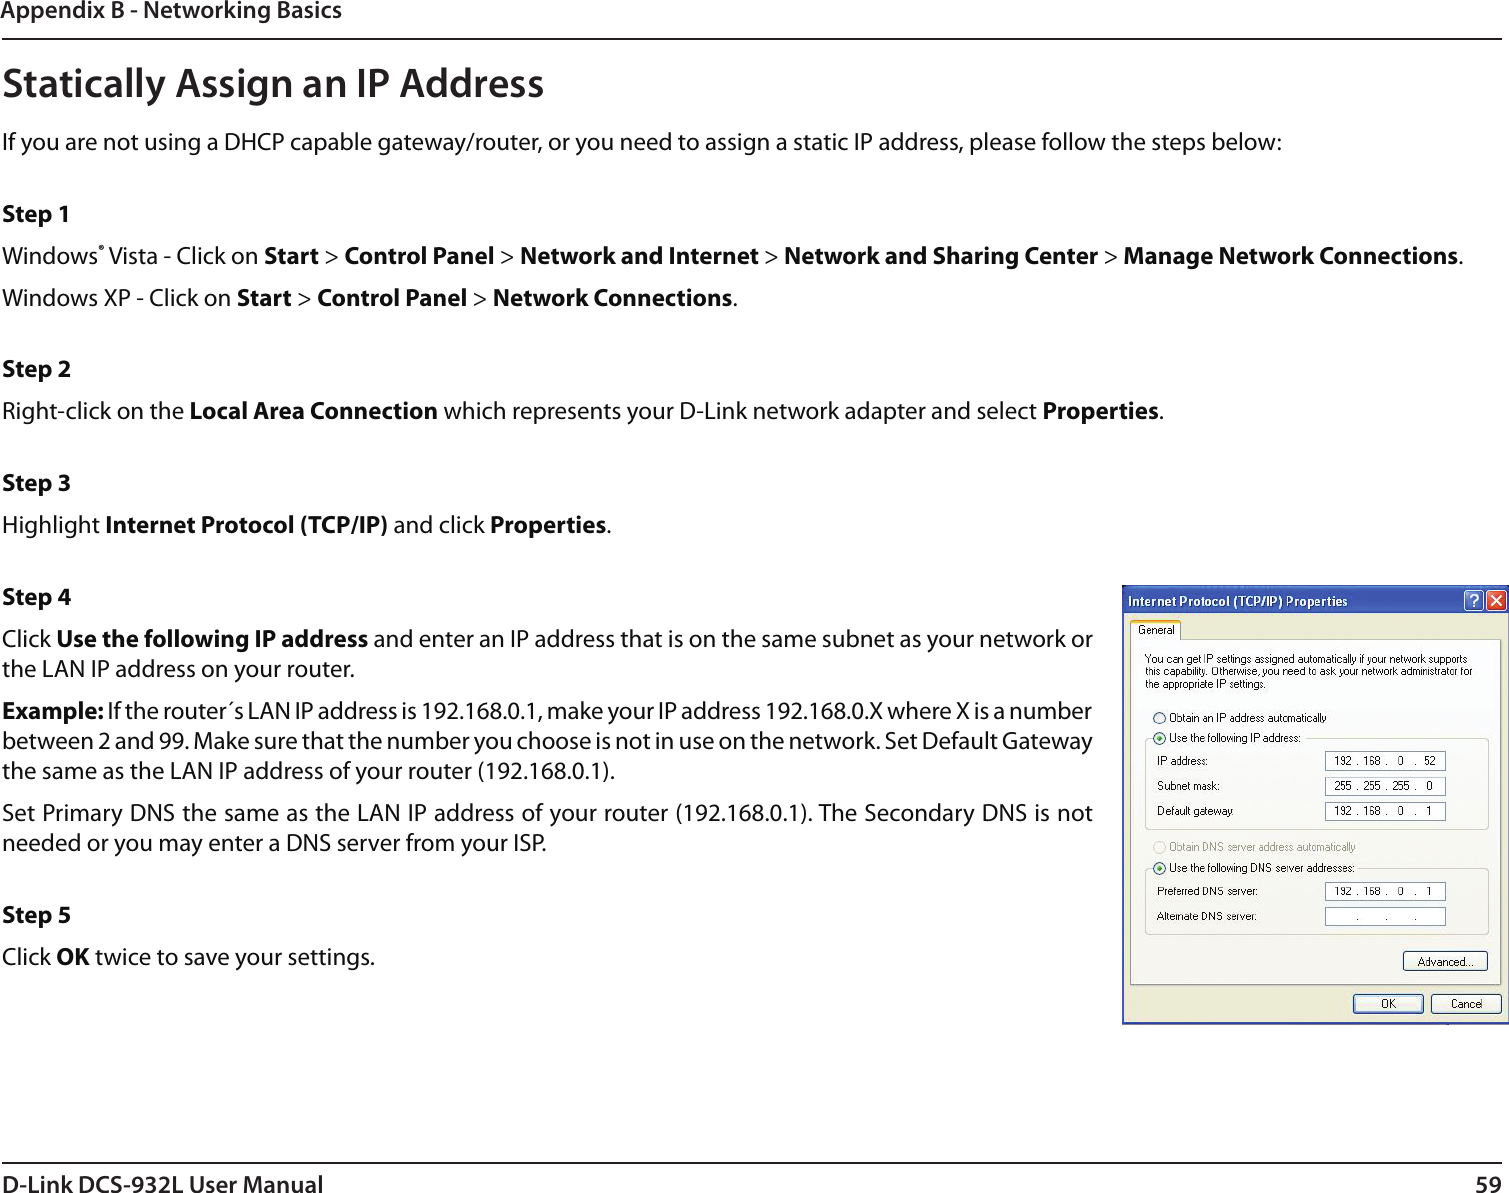 59D-Link DCS-932L User ManualAppendix B - Networking BasicsStatically Assign an IP AddressIf you are not using a DHCP capable gateway/router, or you need to assign a static IP address, please follow the steps below: Step 1Windows® Vista - Click on Start &gt; Control Panel &gt; Network and Internet &gt; Network and Sharing Center &gt; Manage Network Connections. Windows XP - Click on Start &gt; Control Panel &gt; Network Connections. Step 2Right-click on the Local Area Connection which represents your D-Link network adapter and select Properties. Step 3Highlight Internet Protocol (TCP/IP) and click Properties. Step 4Click Use the following IP address and enter an IP address that is on the same subnet as your network or the LAN IP address on your router. Example: If the router´s LAN IP address is 192.168.0.1, make your IP address 192.168.0.X where X is a number between 2 and 99. Make sure that the number you choose is not in use on the network. Set Default Gateway the same as the LAN IP address of your router (192.168.0.1). Set Primary DNS the same as the LAN IP address of your router (192.168.0.1). The Secondary DNS is not needed or you may enter a DNS server from your ISP. Step 5Click OK twice to save your settings.